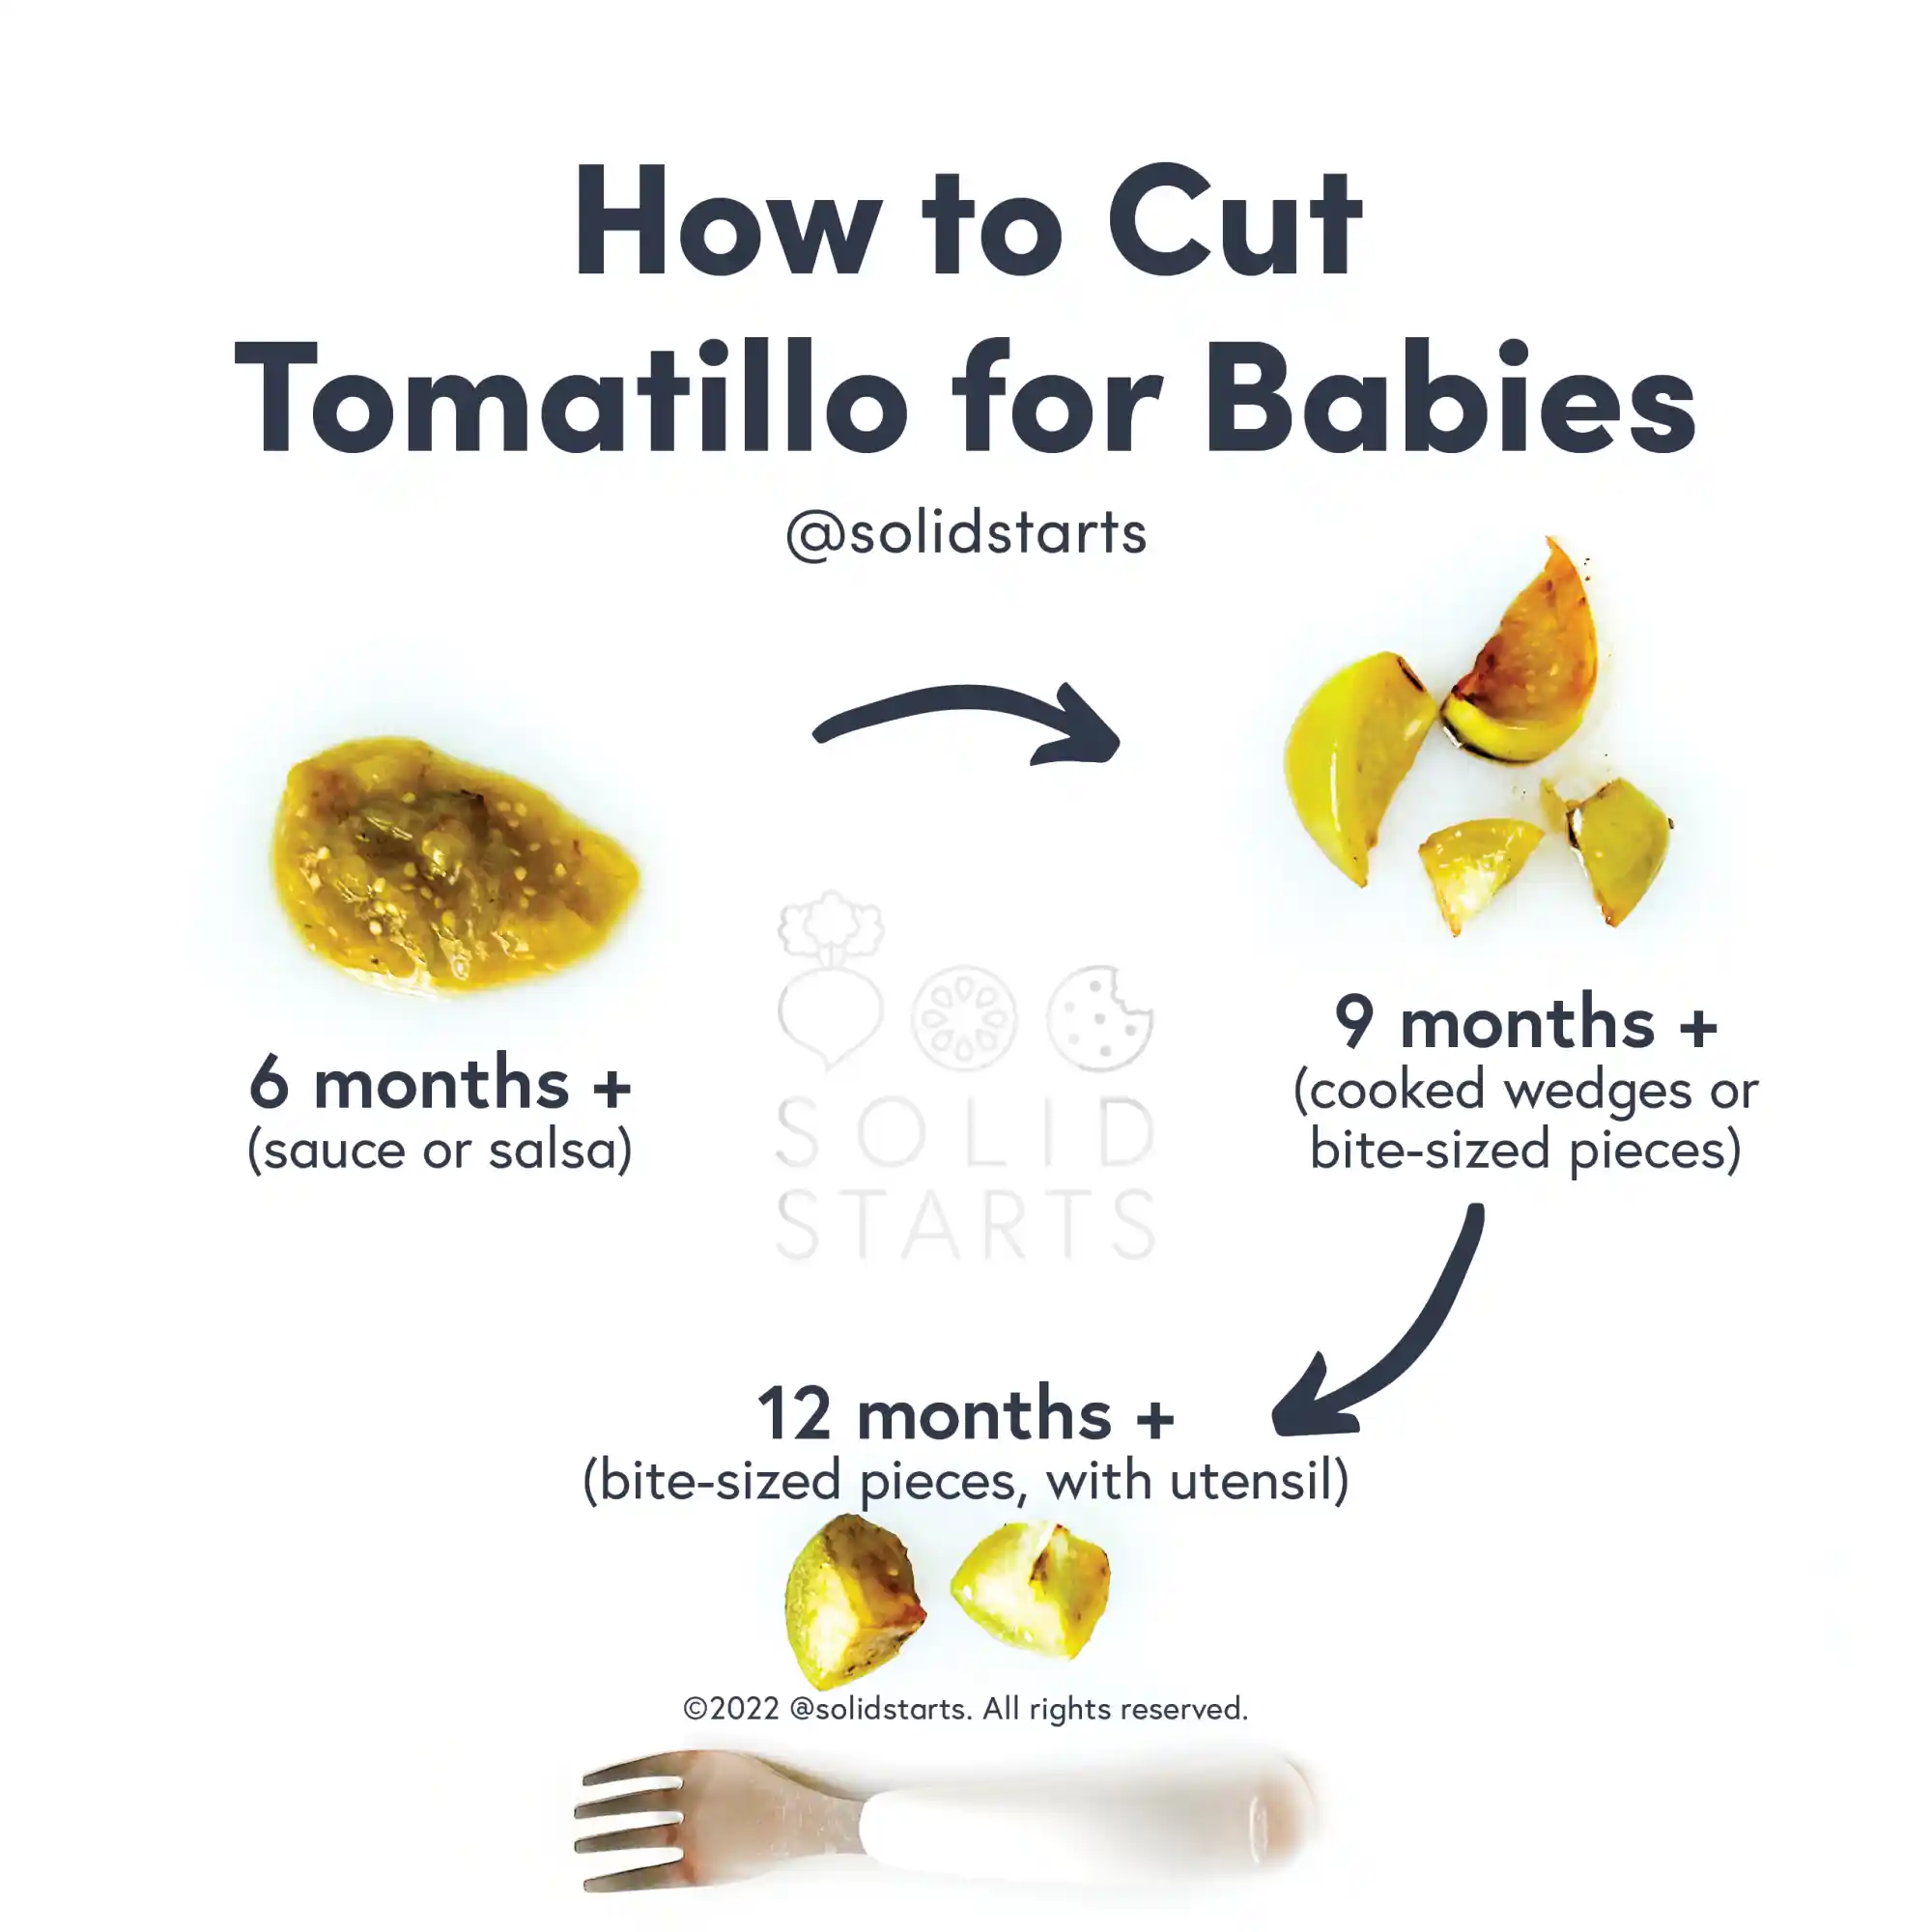 a Solid Starts infographic with the header How to Cut Tomatillo for Babies: sauce or salsa for 6 months+, cooked wedges or bite-sized pieces for 9 months+, and bite-sized pieces with a utensil for 12 months+